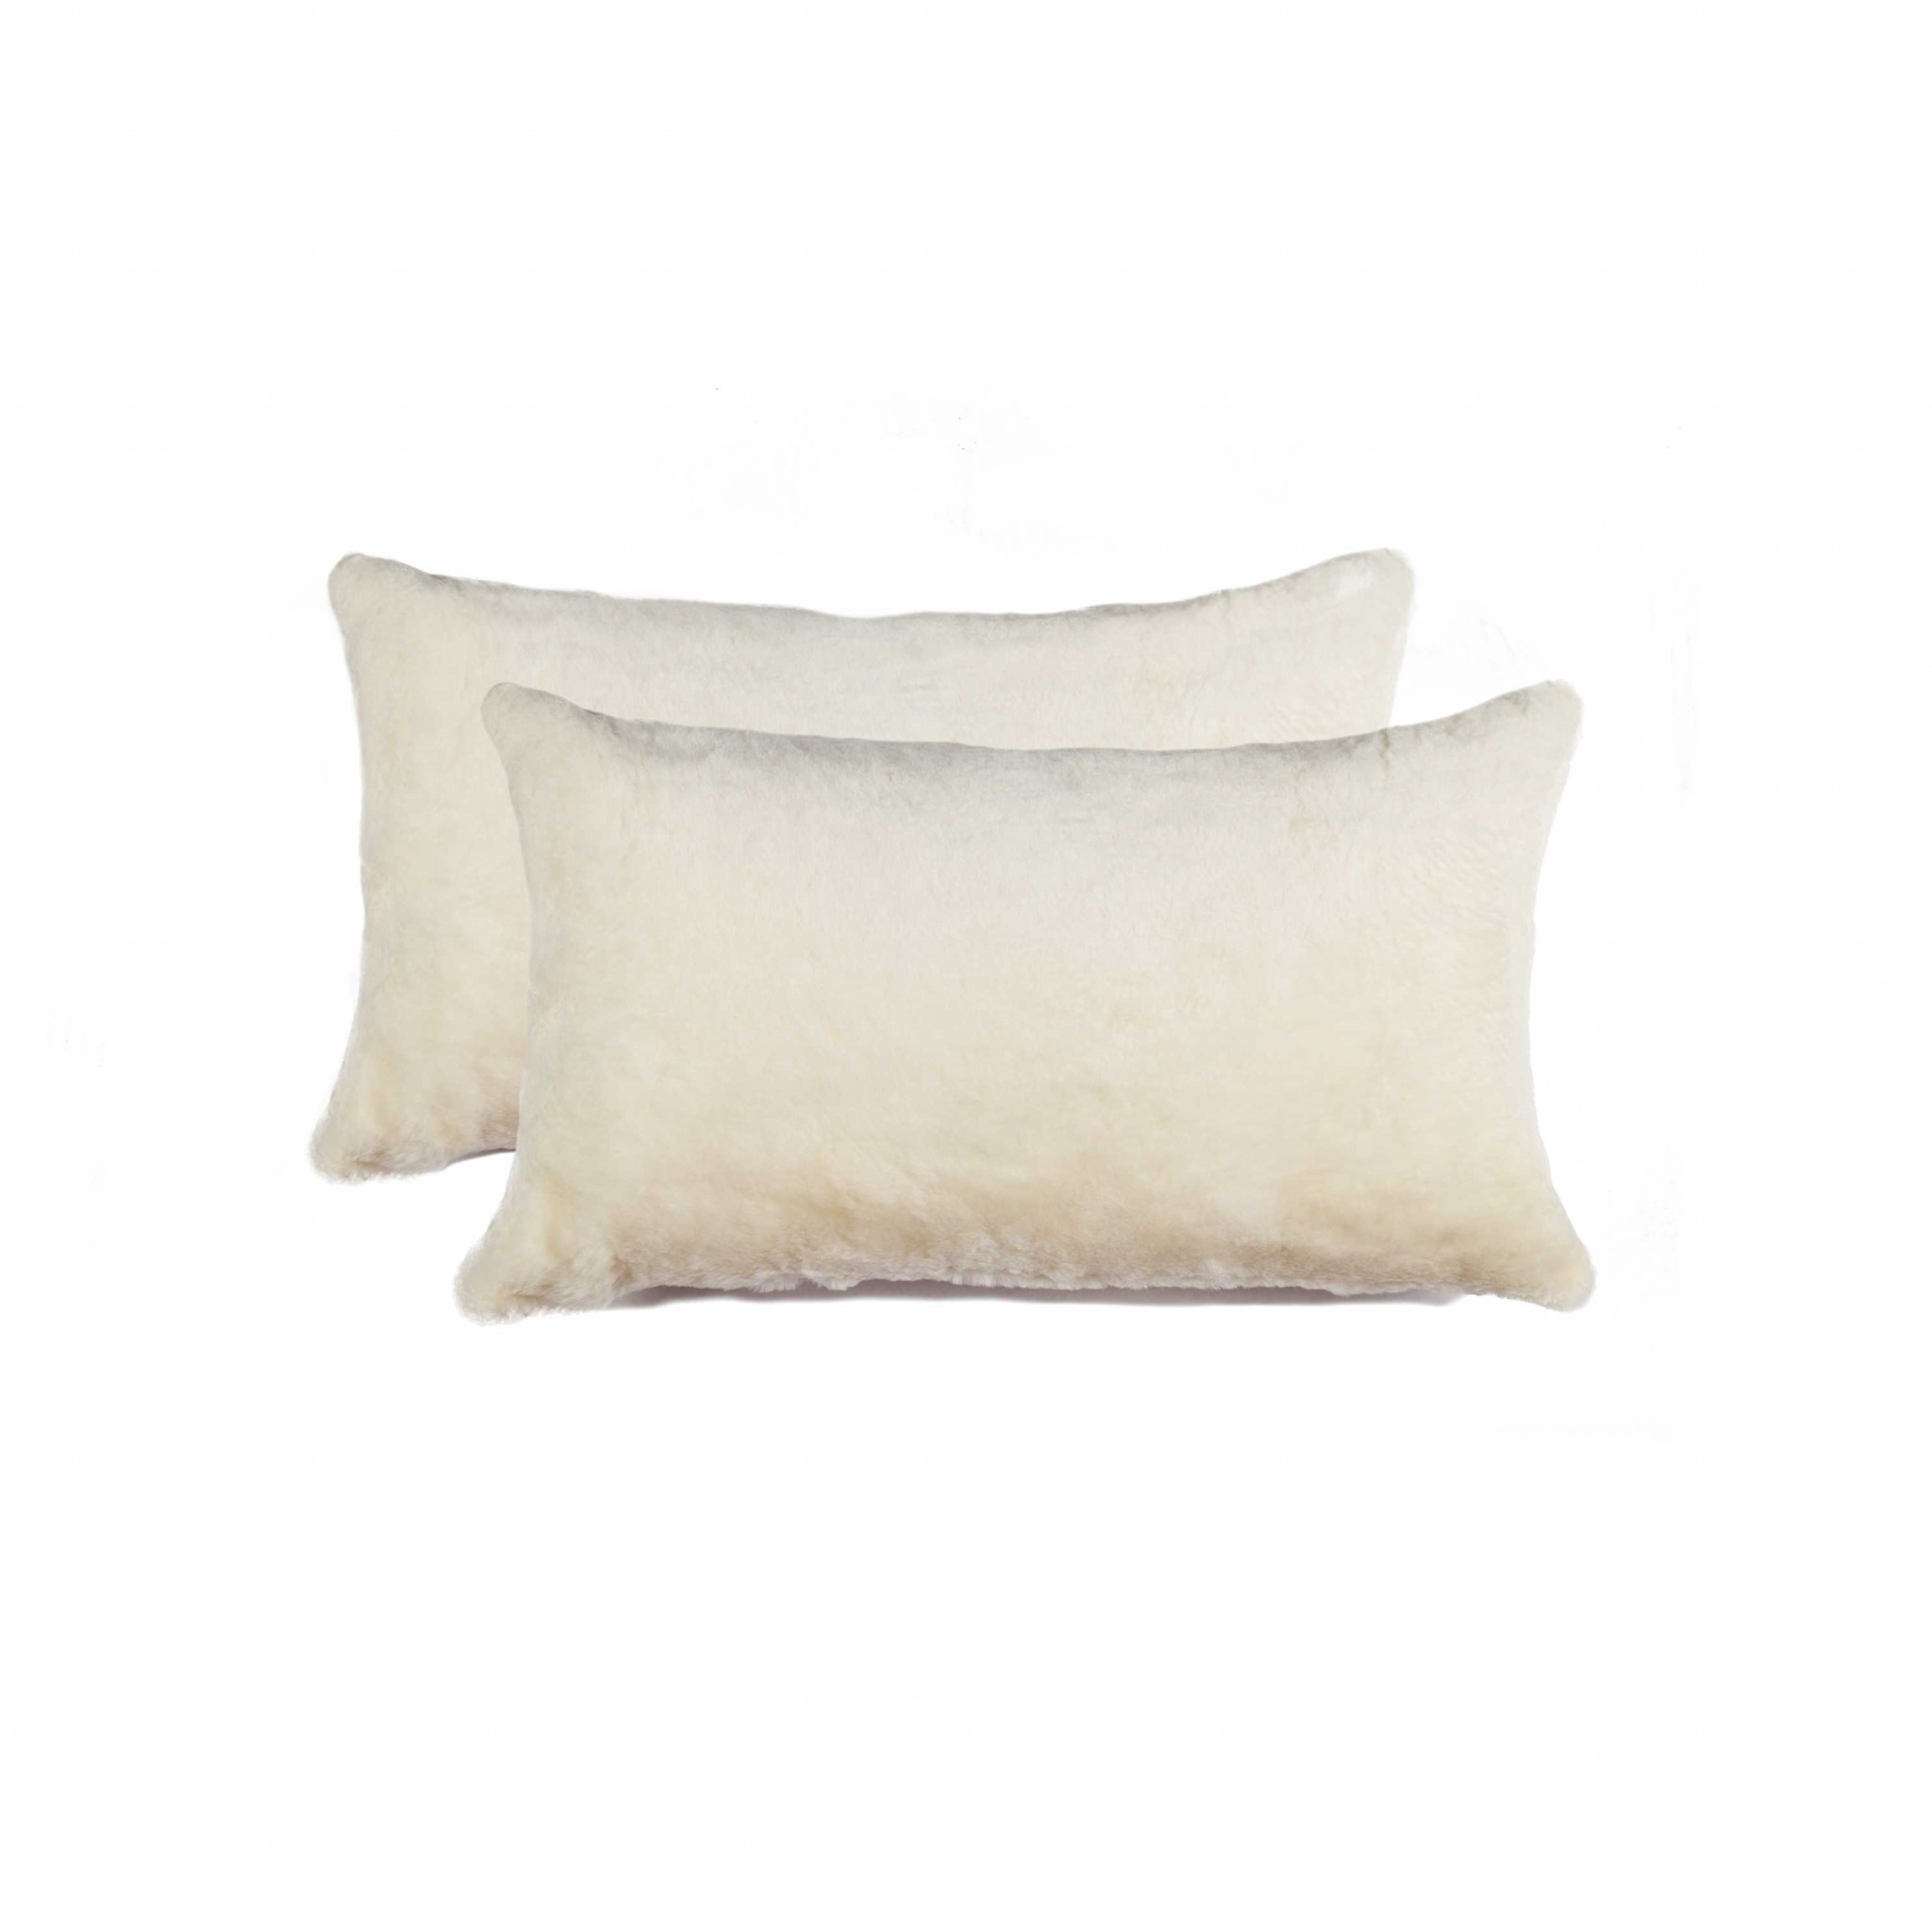 12" x 20" x 5" Natural, Cowhide - Pillow 2-Pack